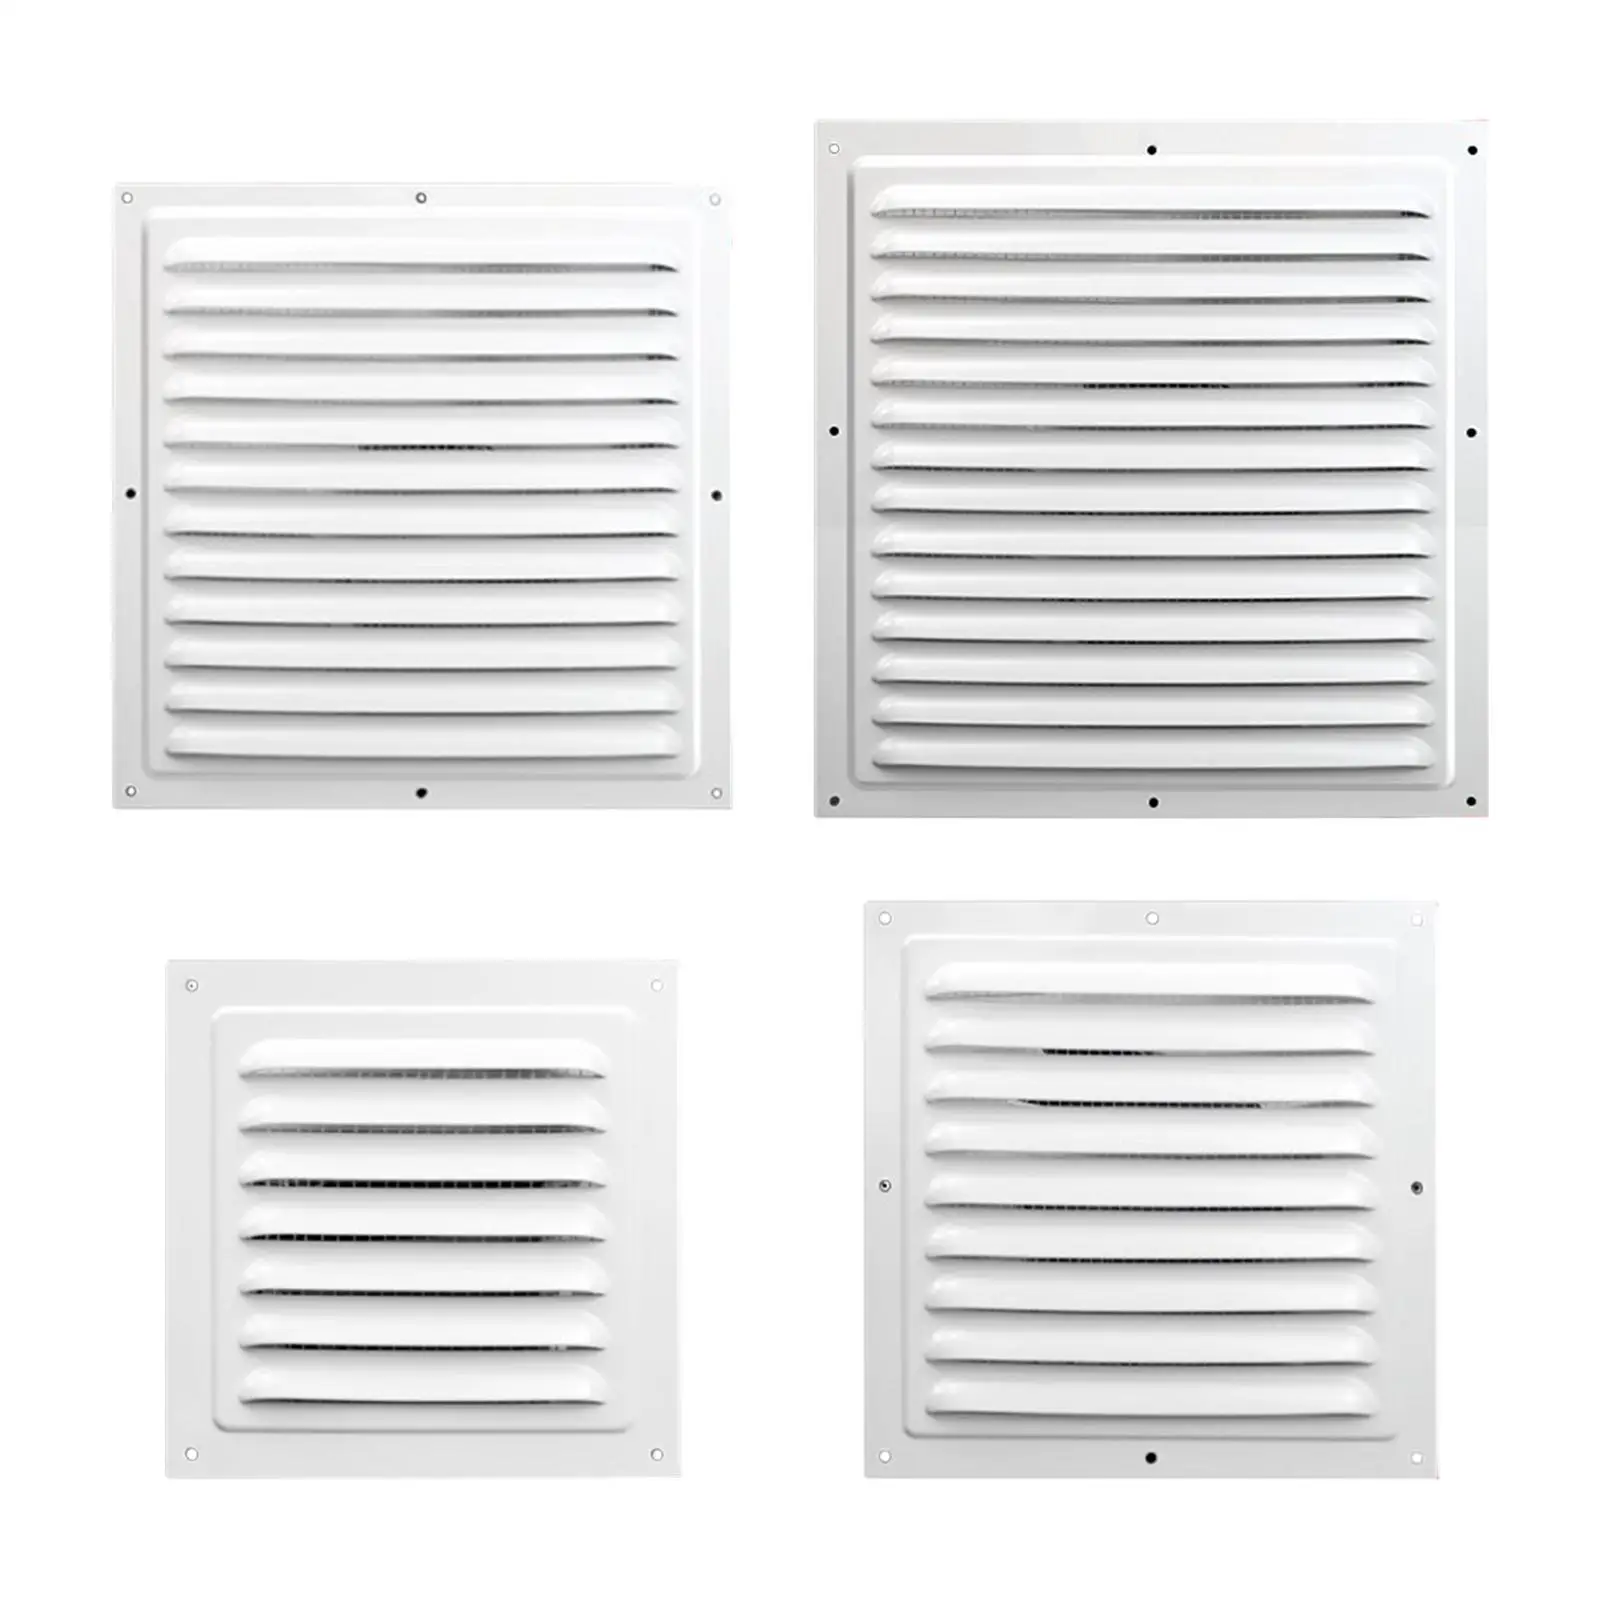 ventilation grille cover, air return grille cover for kitchens,